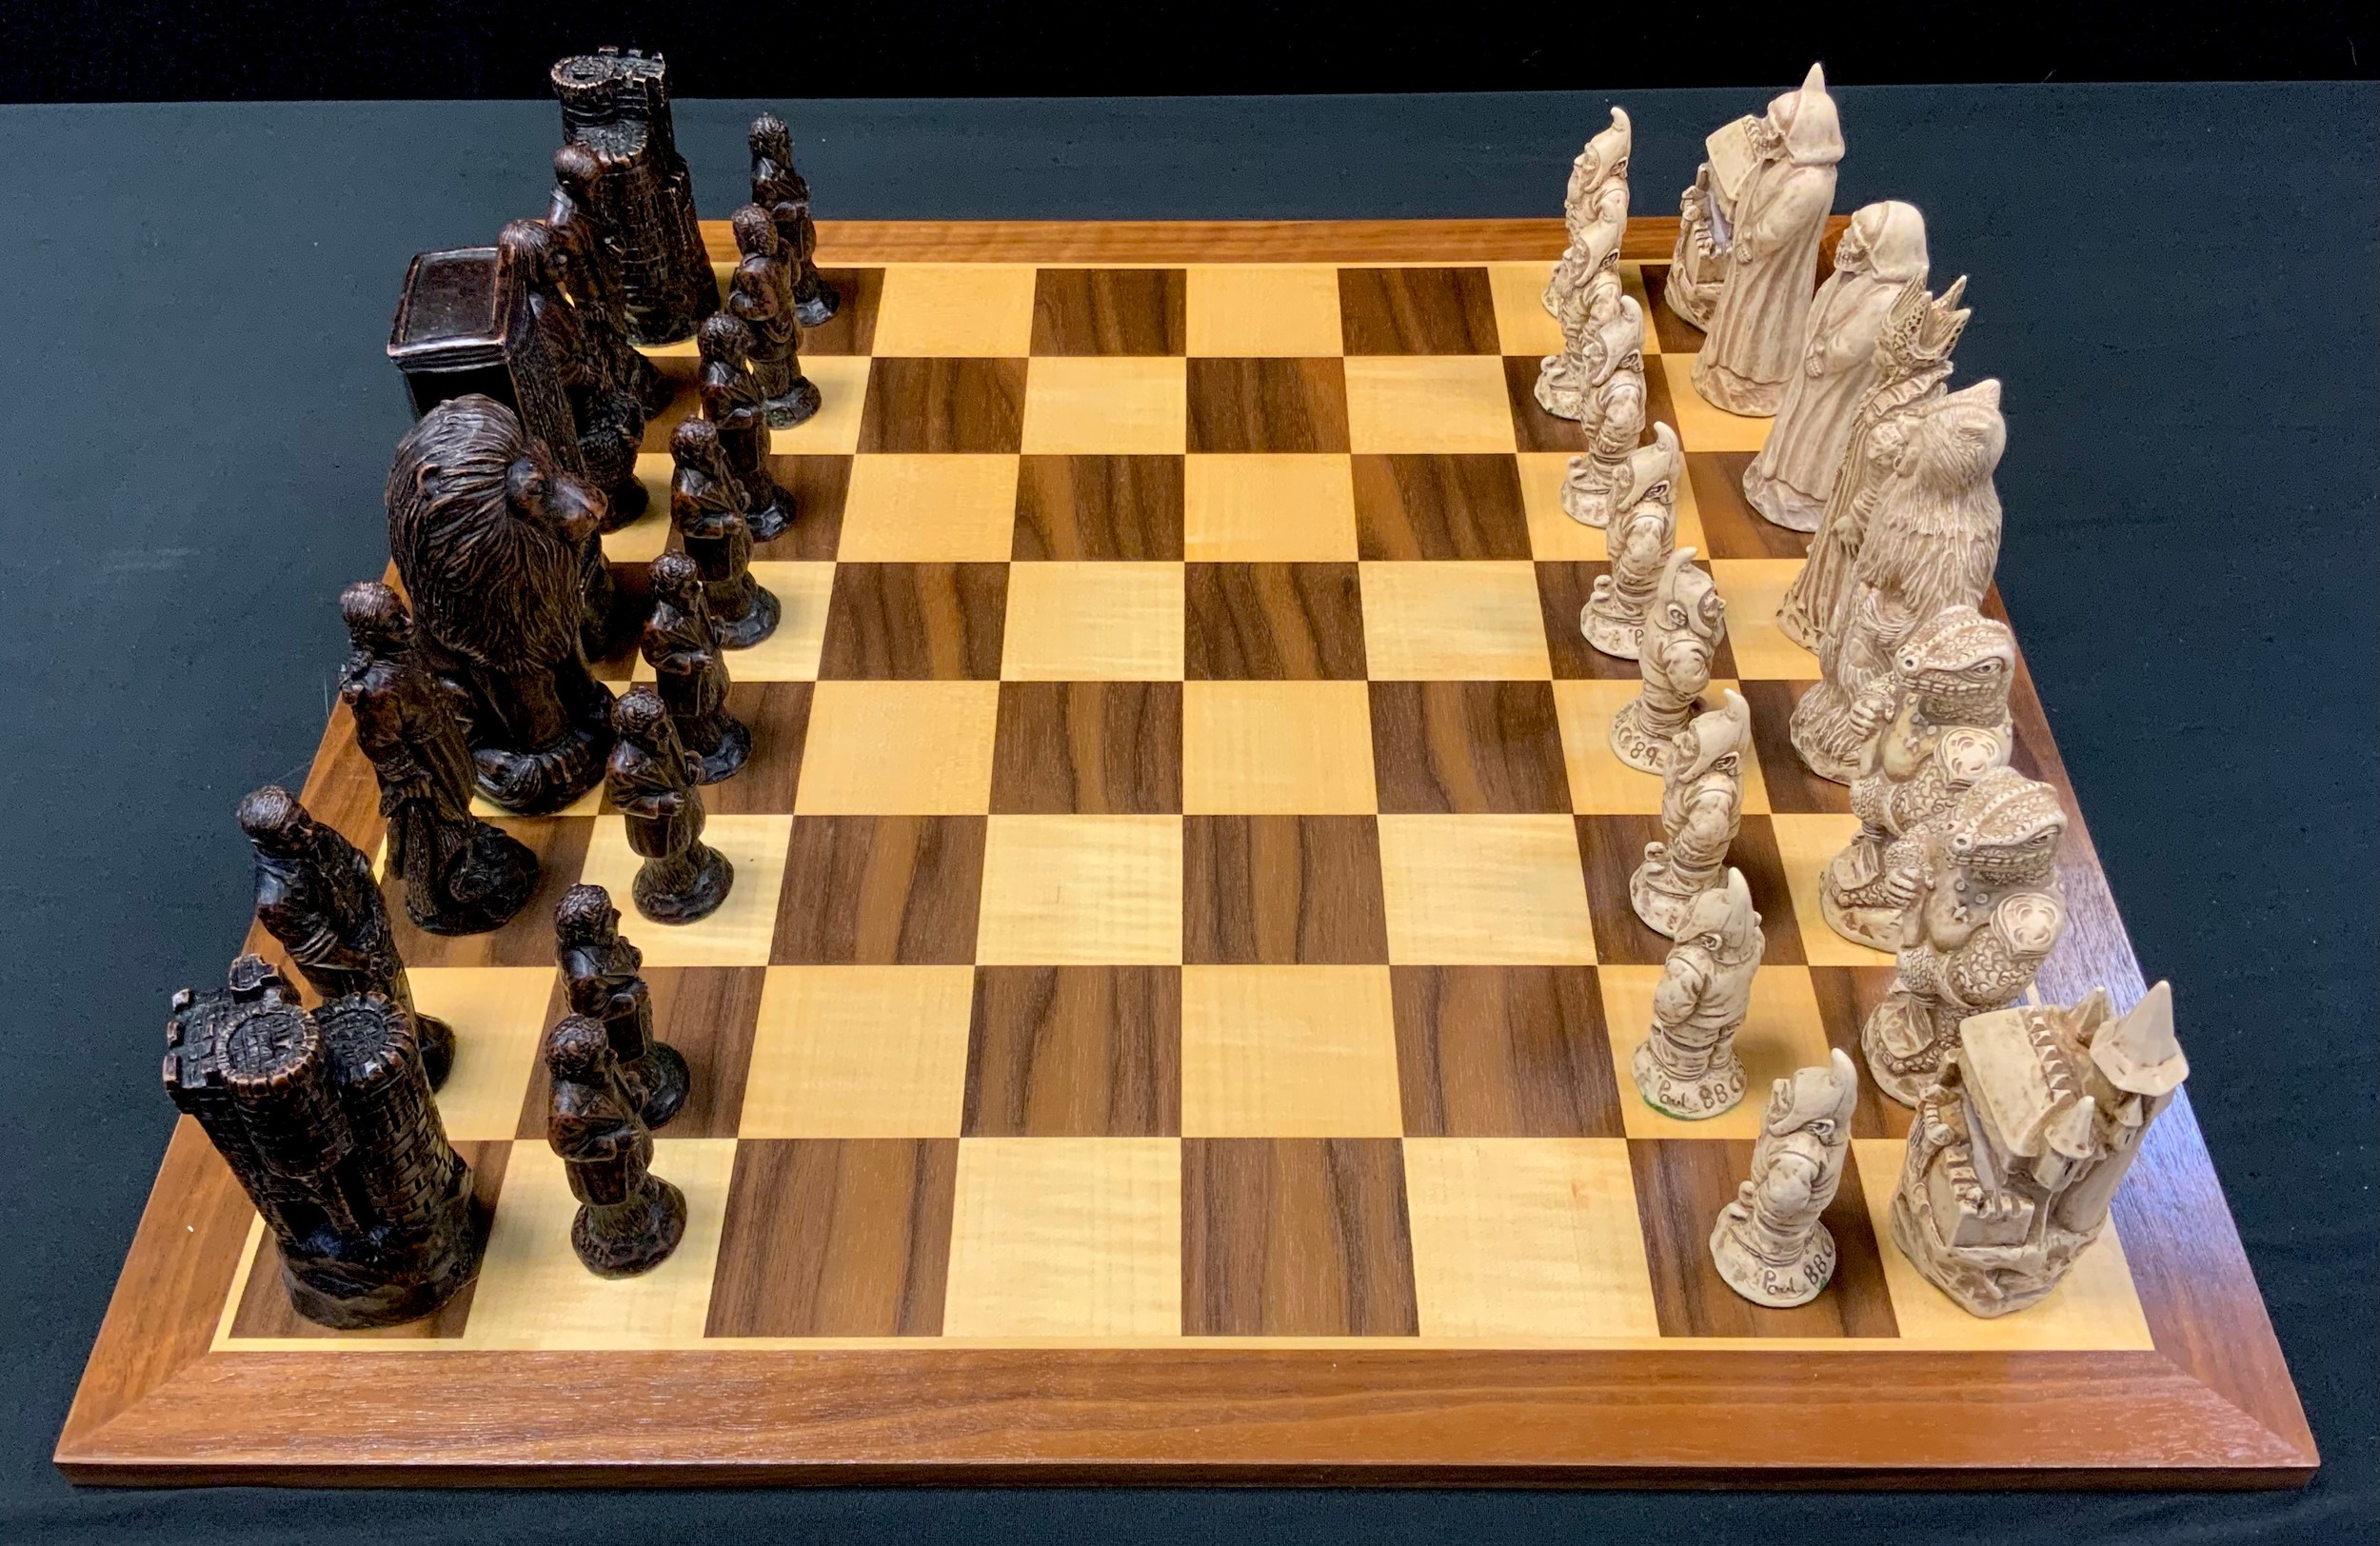 A Lion The Witch and The Wardrobe Chess set, after C S Lewis book, the kings as Aslan & Snow